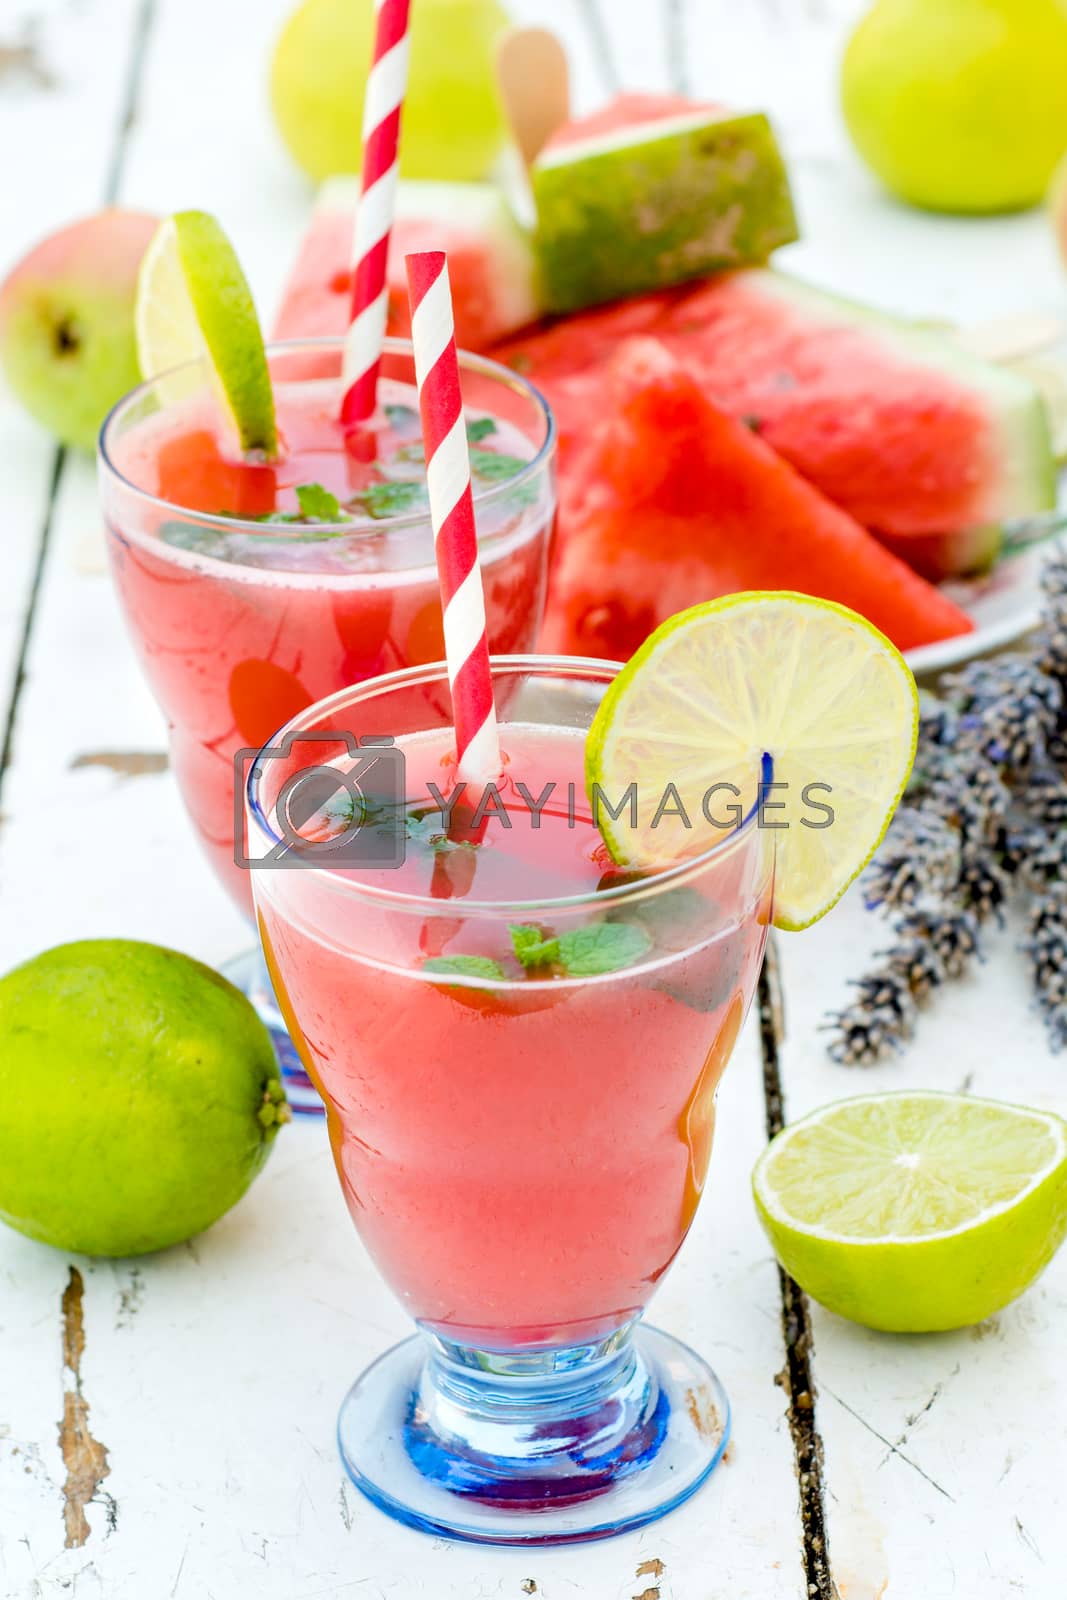 Royalty free image of Summer refreshment by badmanproduction